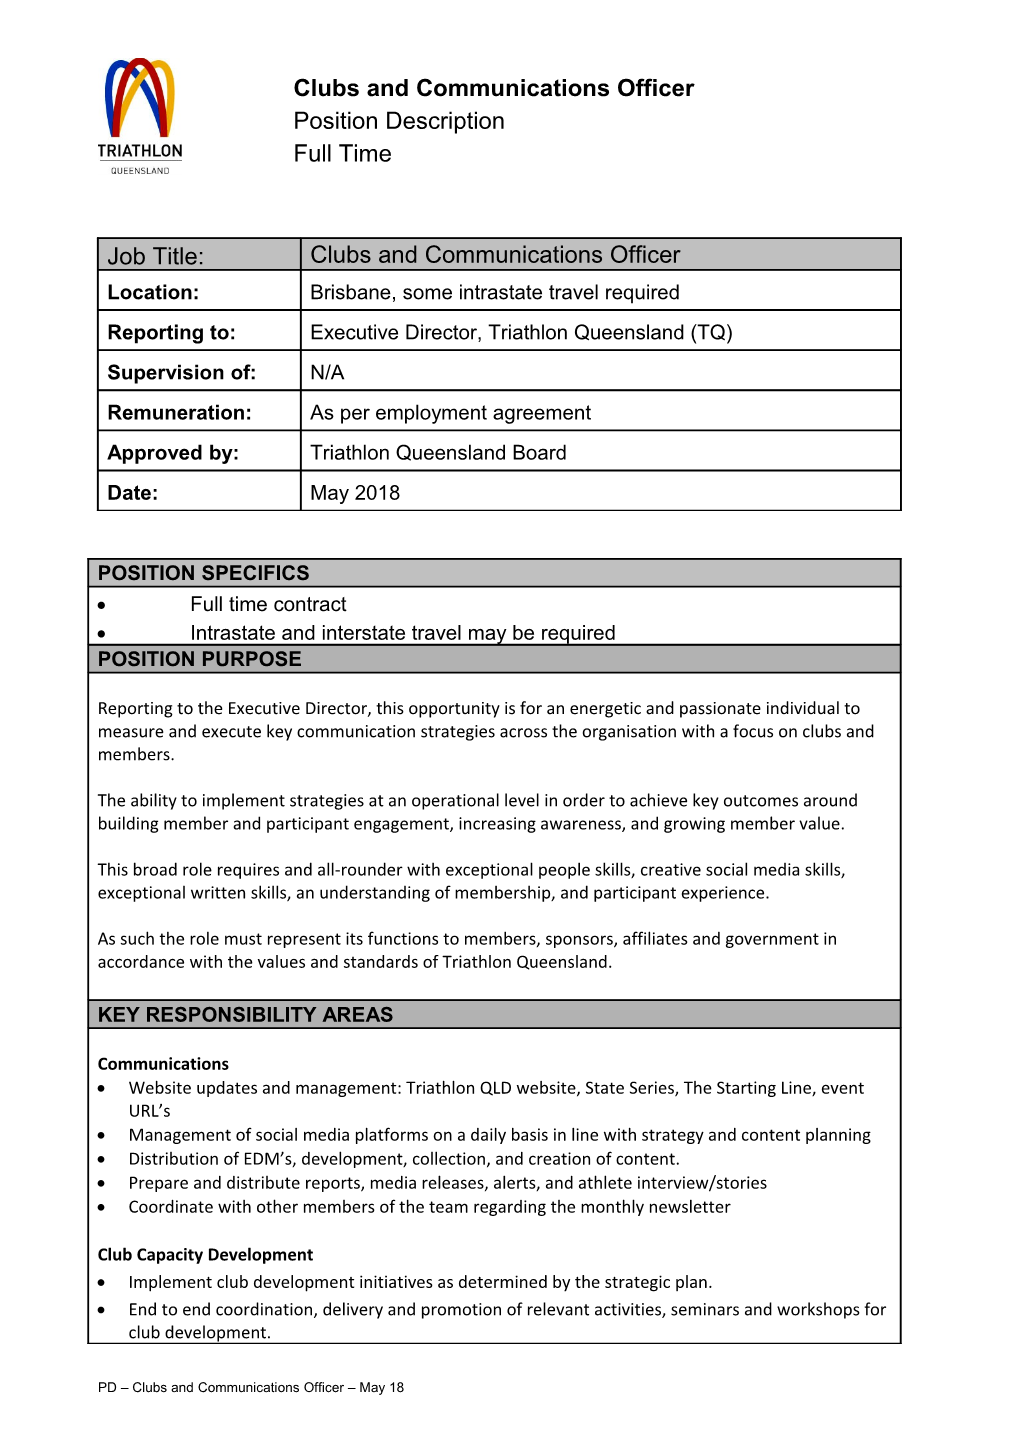 Clubs and Communications Officer